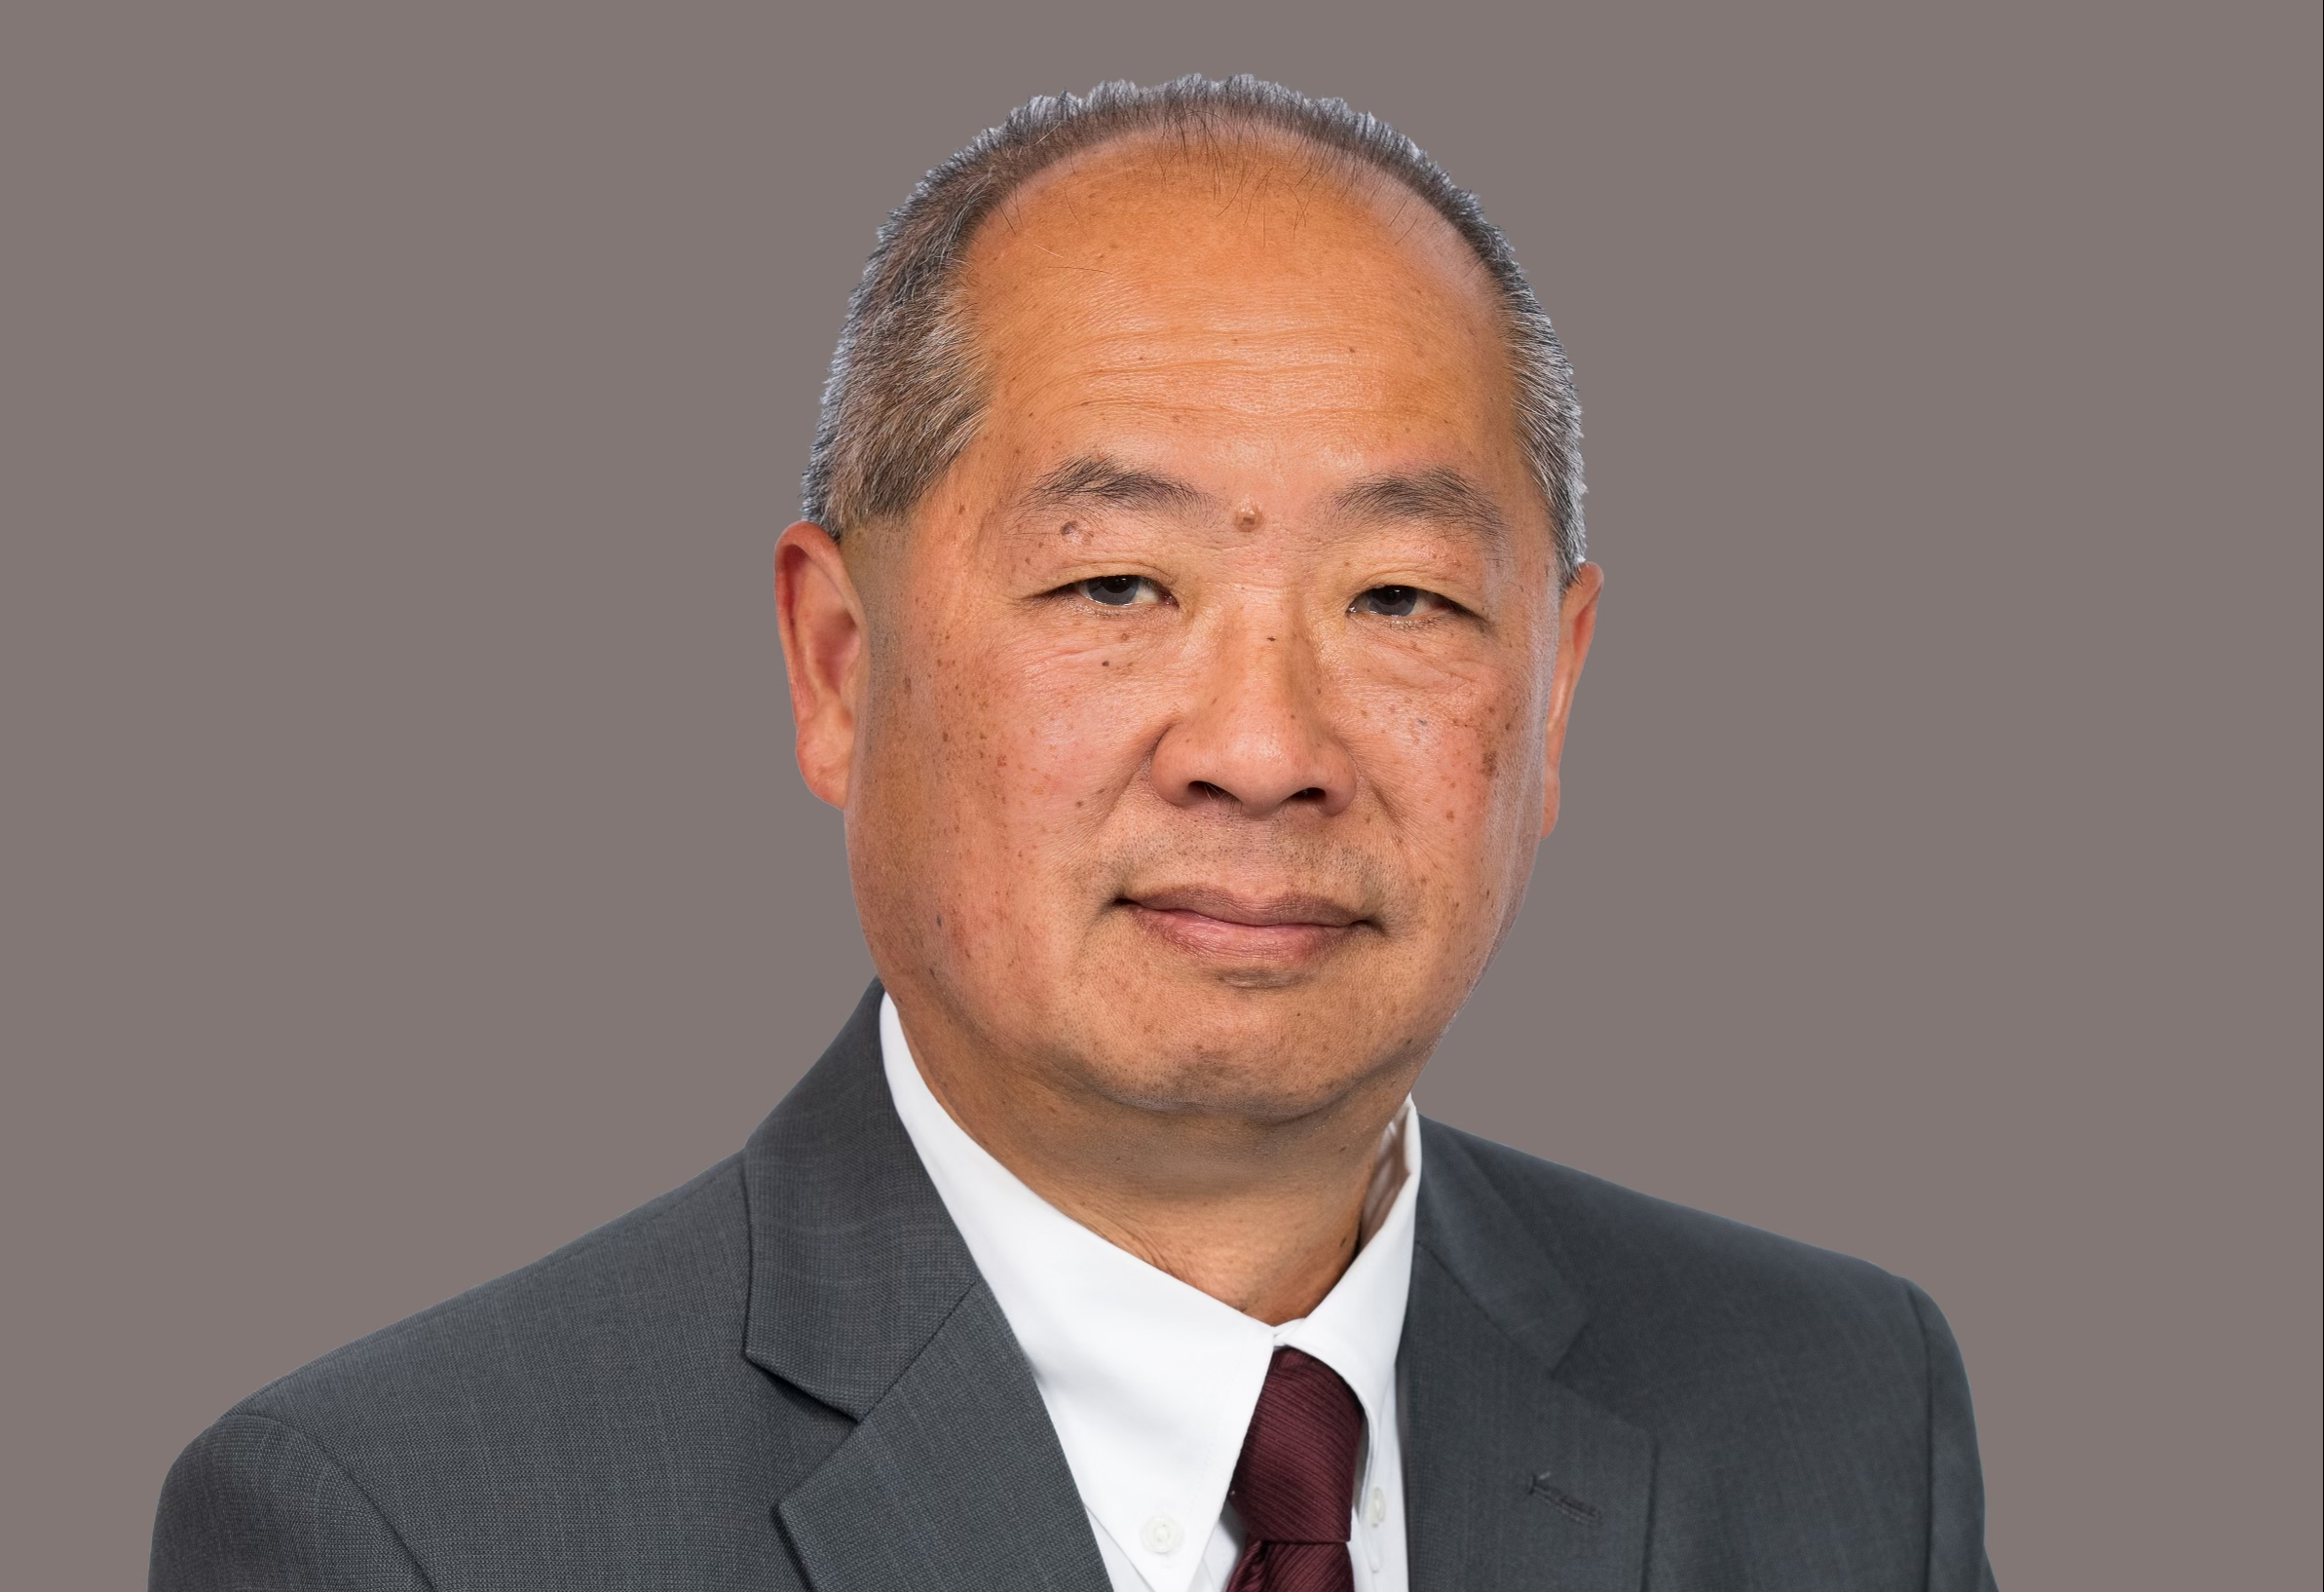 Phillip Eng headshot: a middle-aged man with close-cropped hair wearing a dark grey suit and red tie.